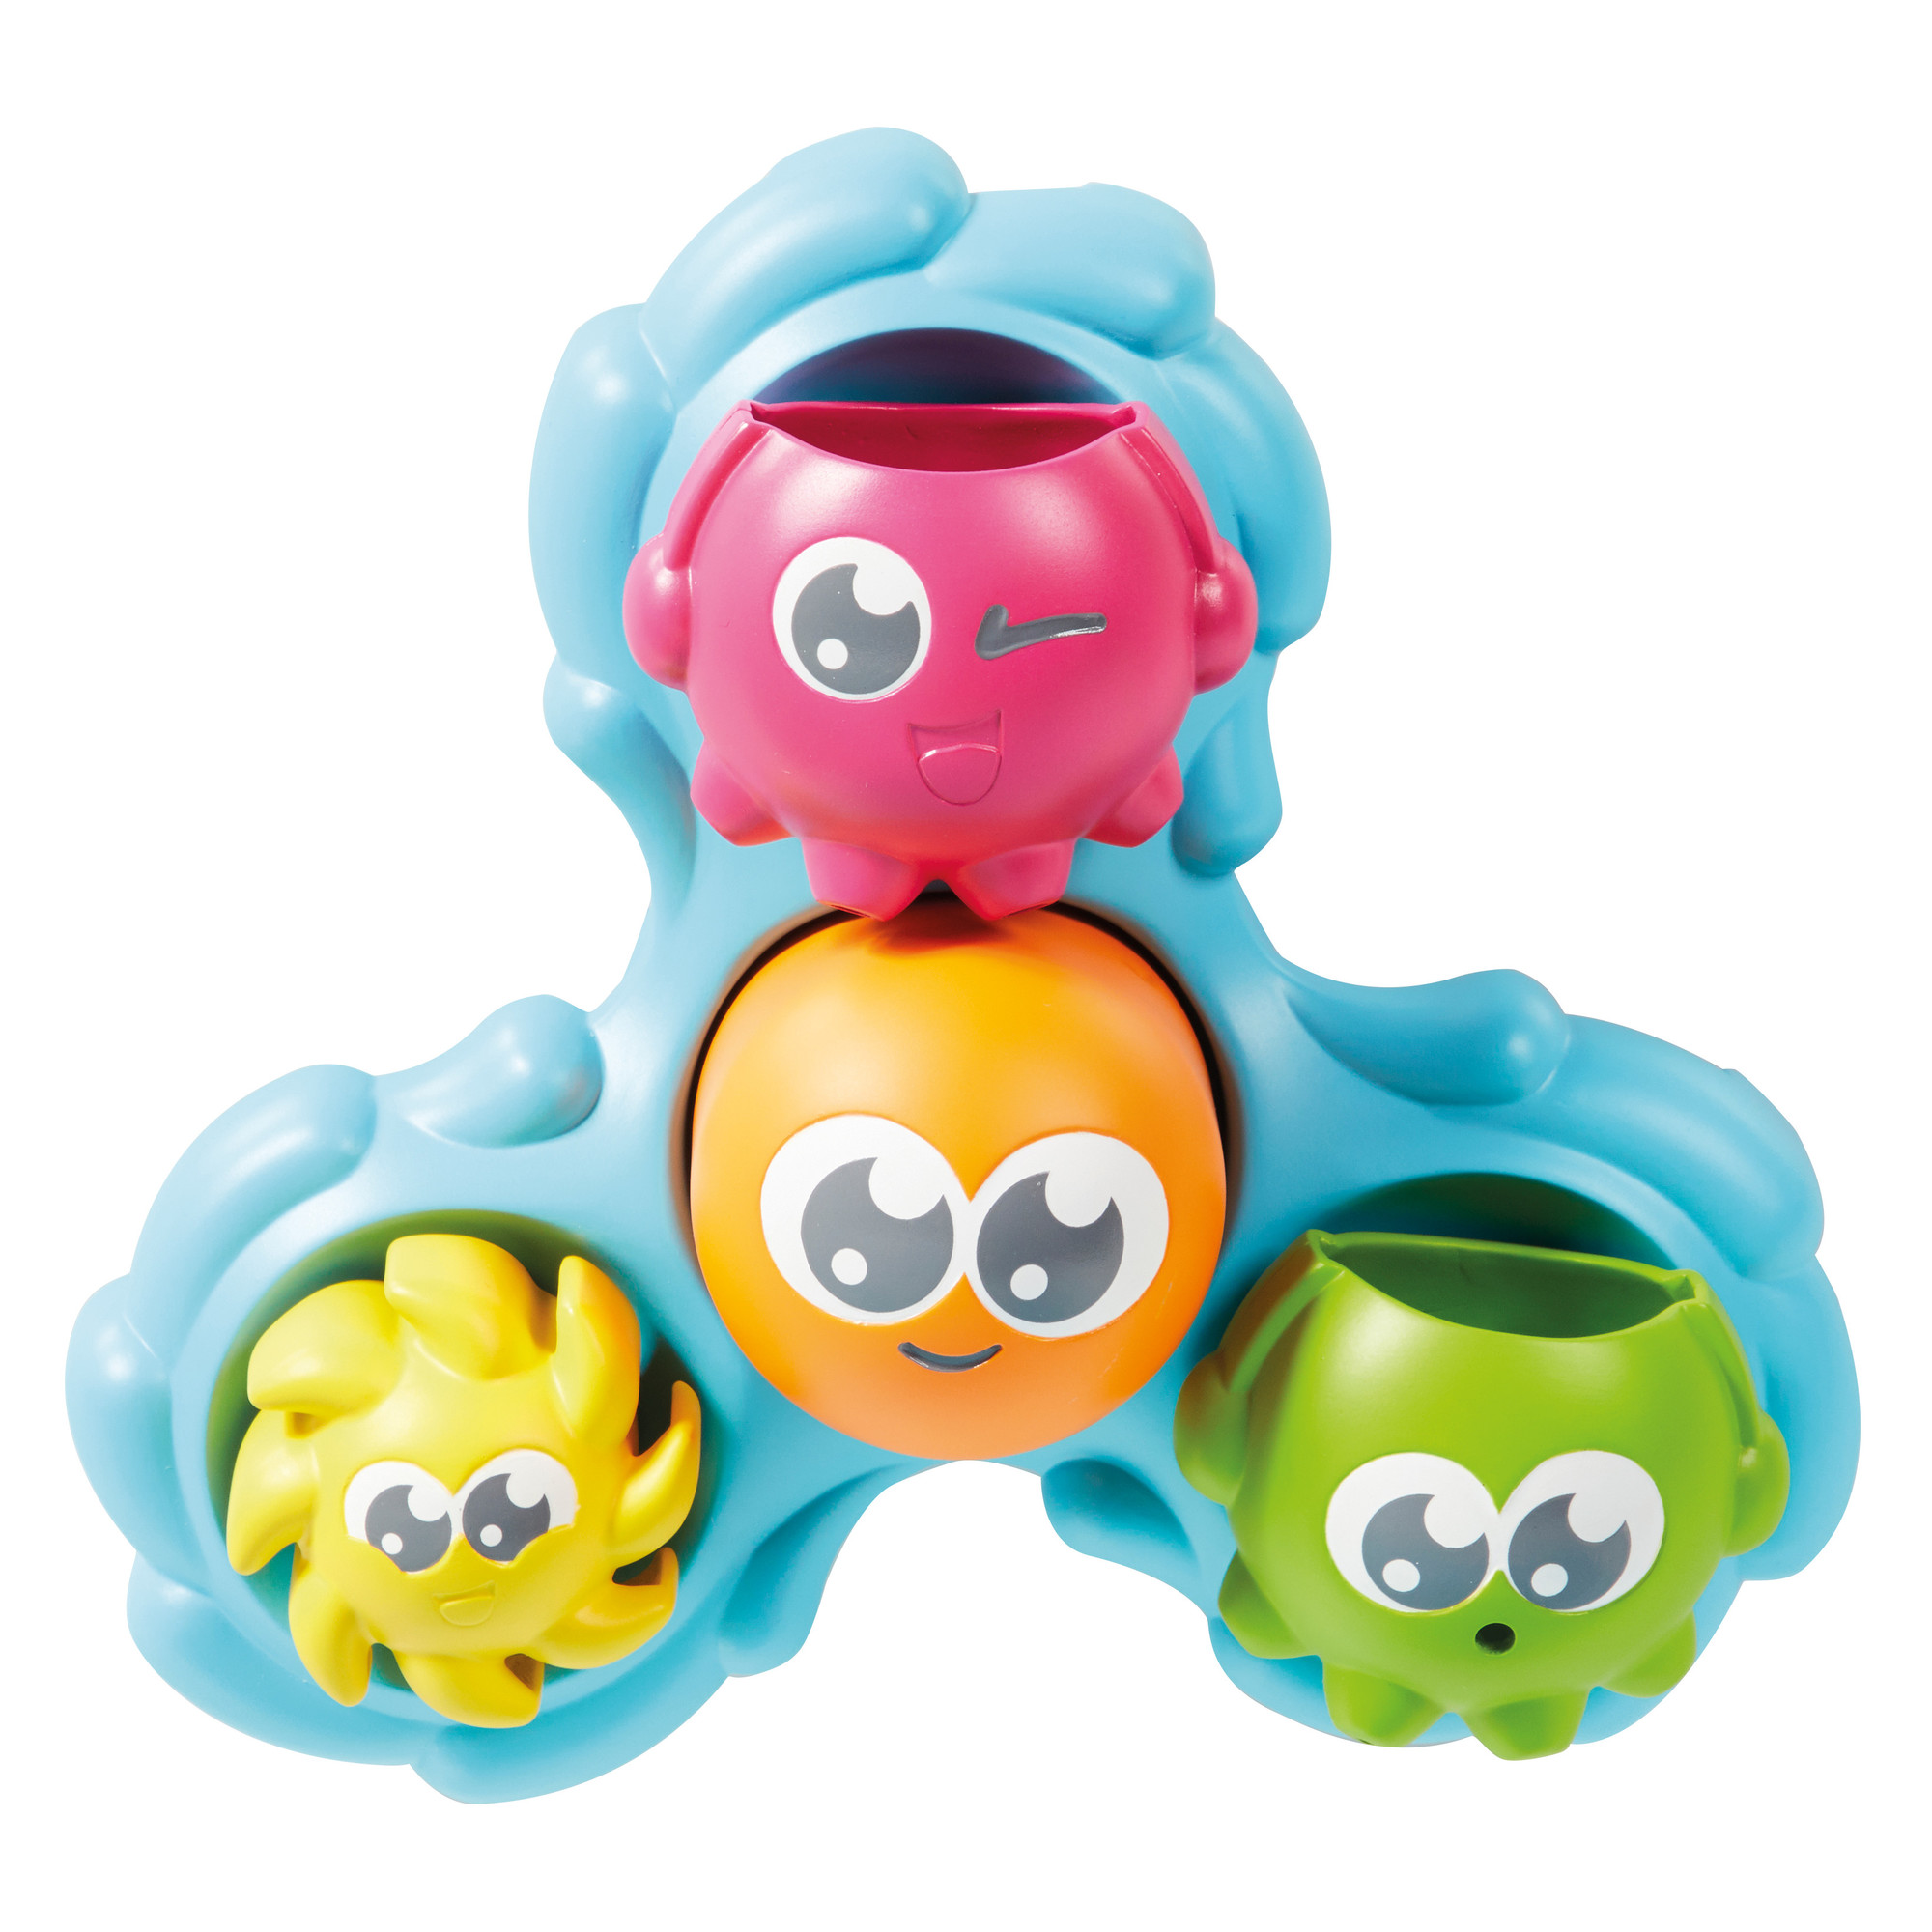 TOMY Toomies Spin And Splash Octopals Bath Toy, Colorful and Fun Toddler Bath Toys - image 1 of 6